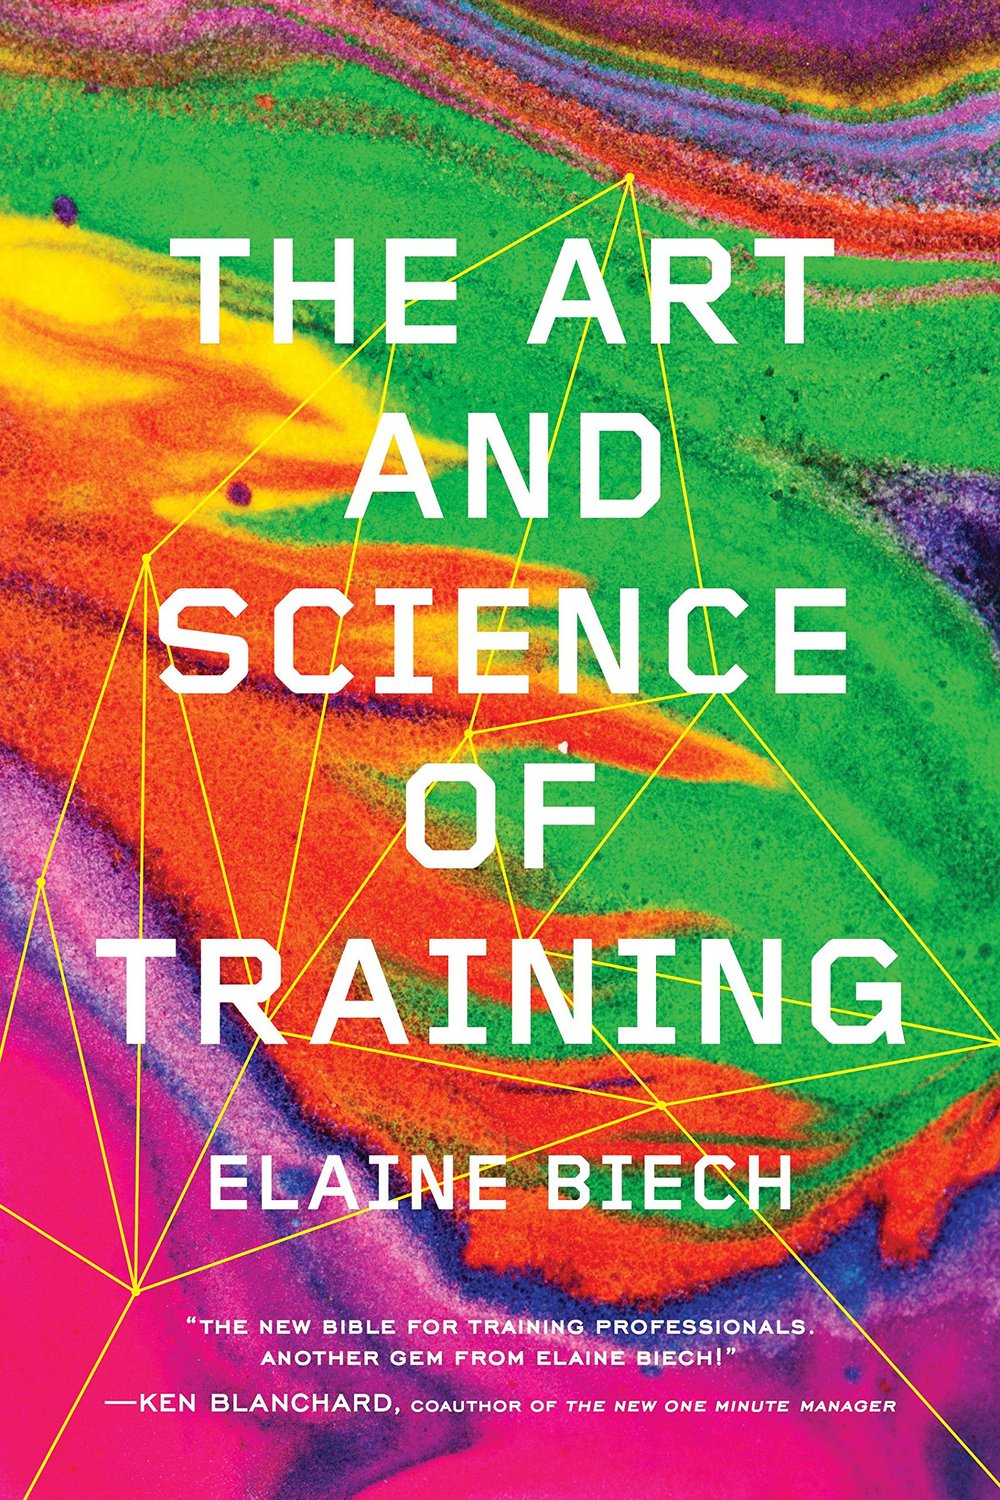 The Art and Science of Training by Elaine Biech